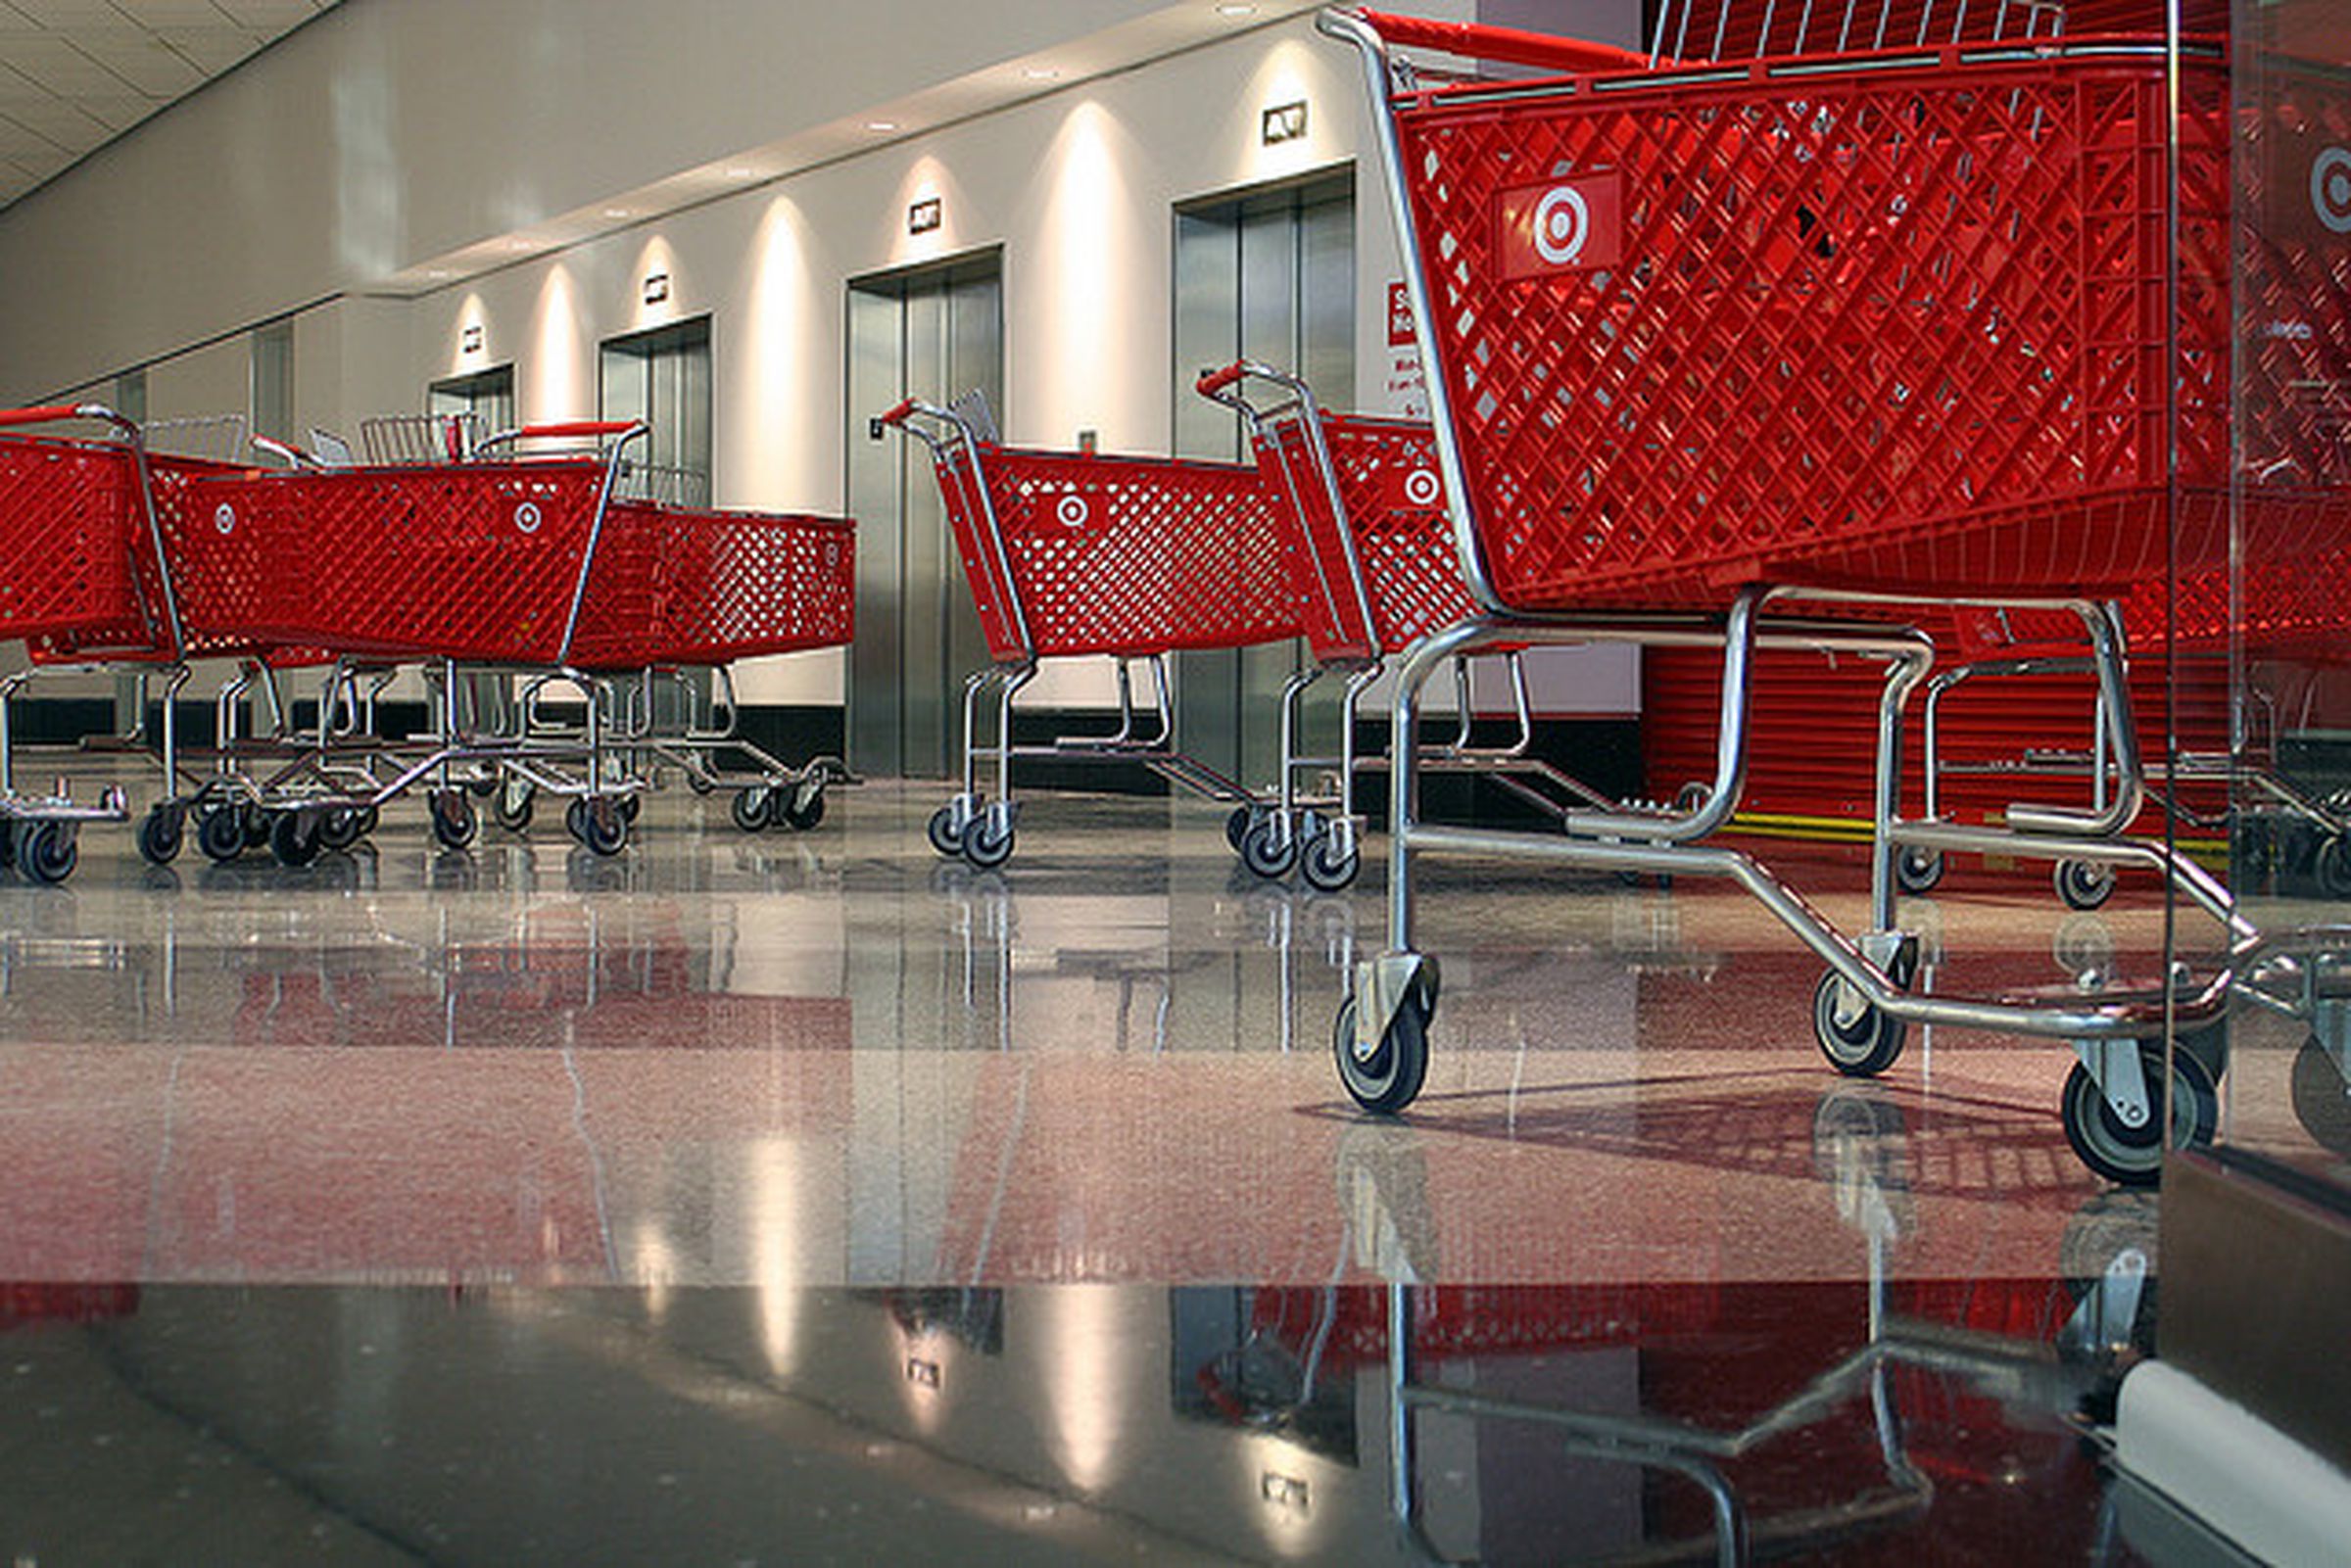 Target shopping carts http://www.flickr.com/photos/intangible/2355572339/